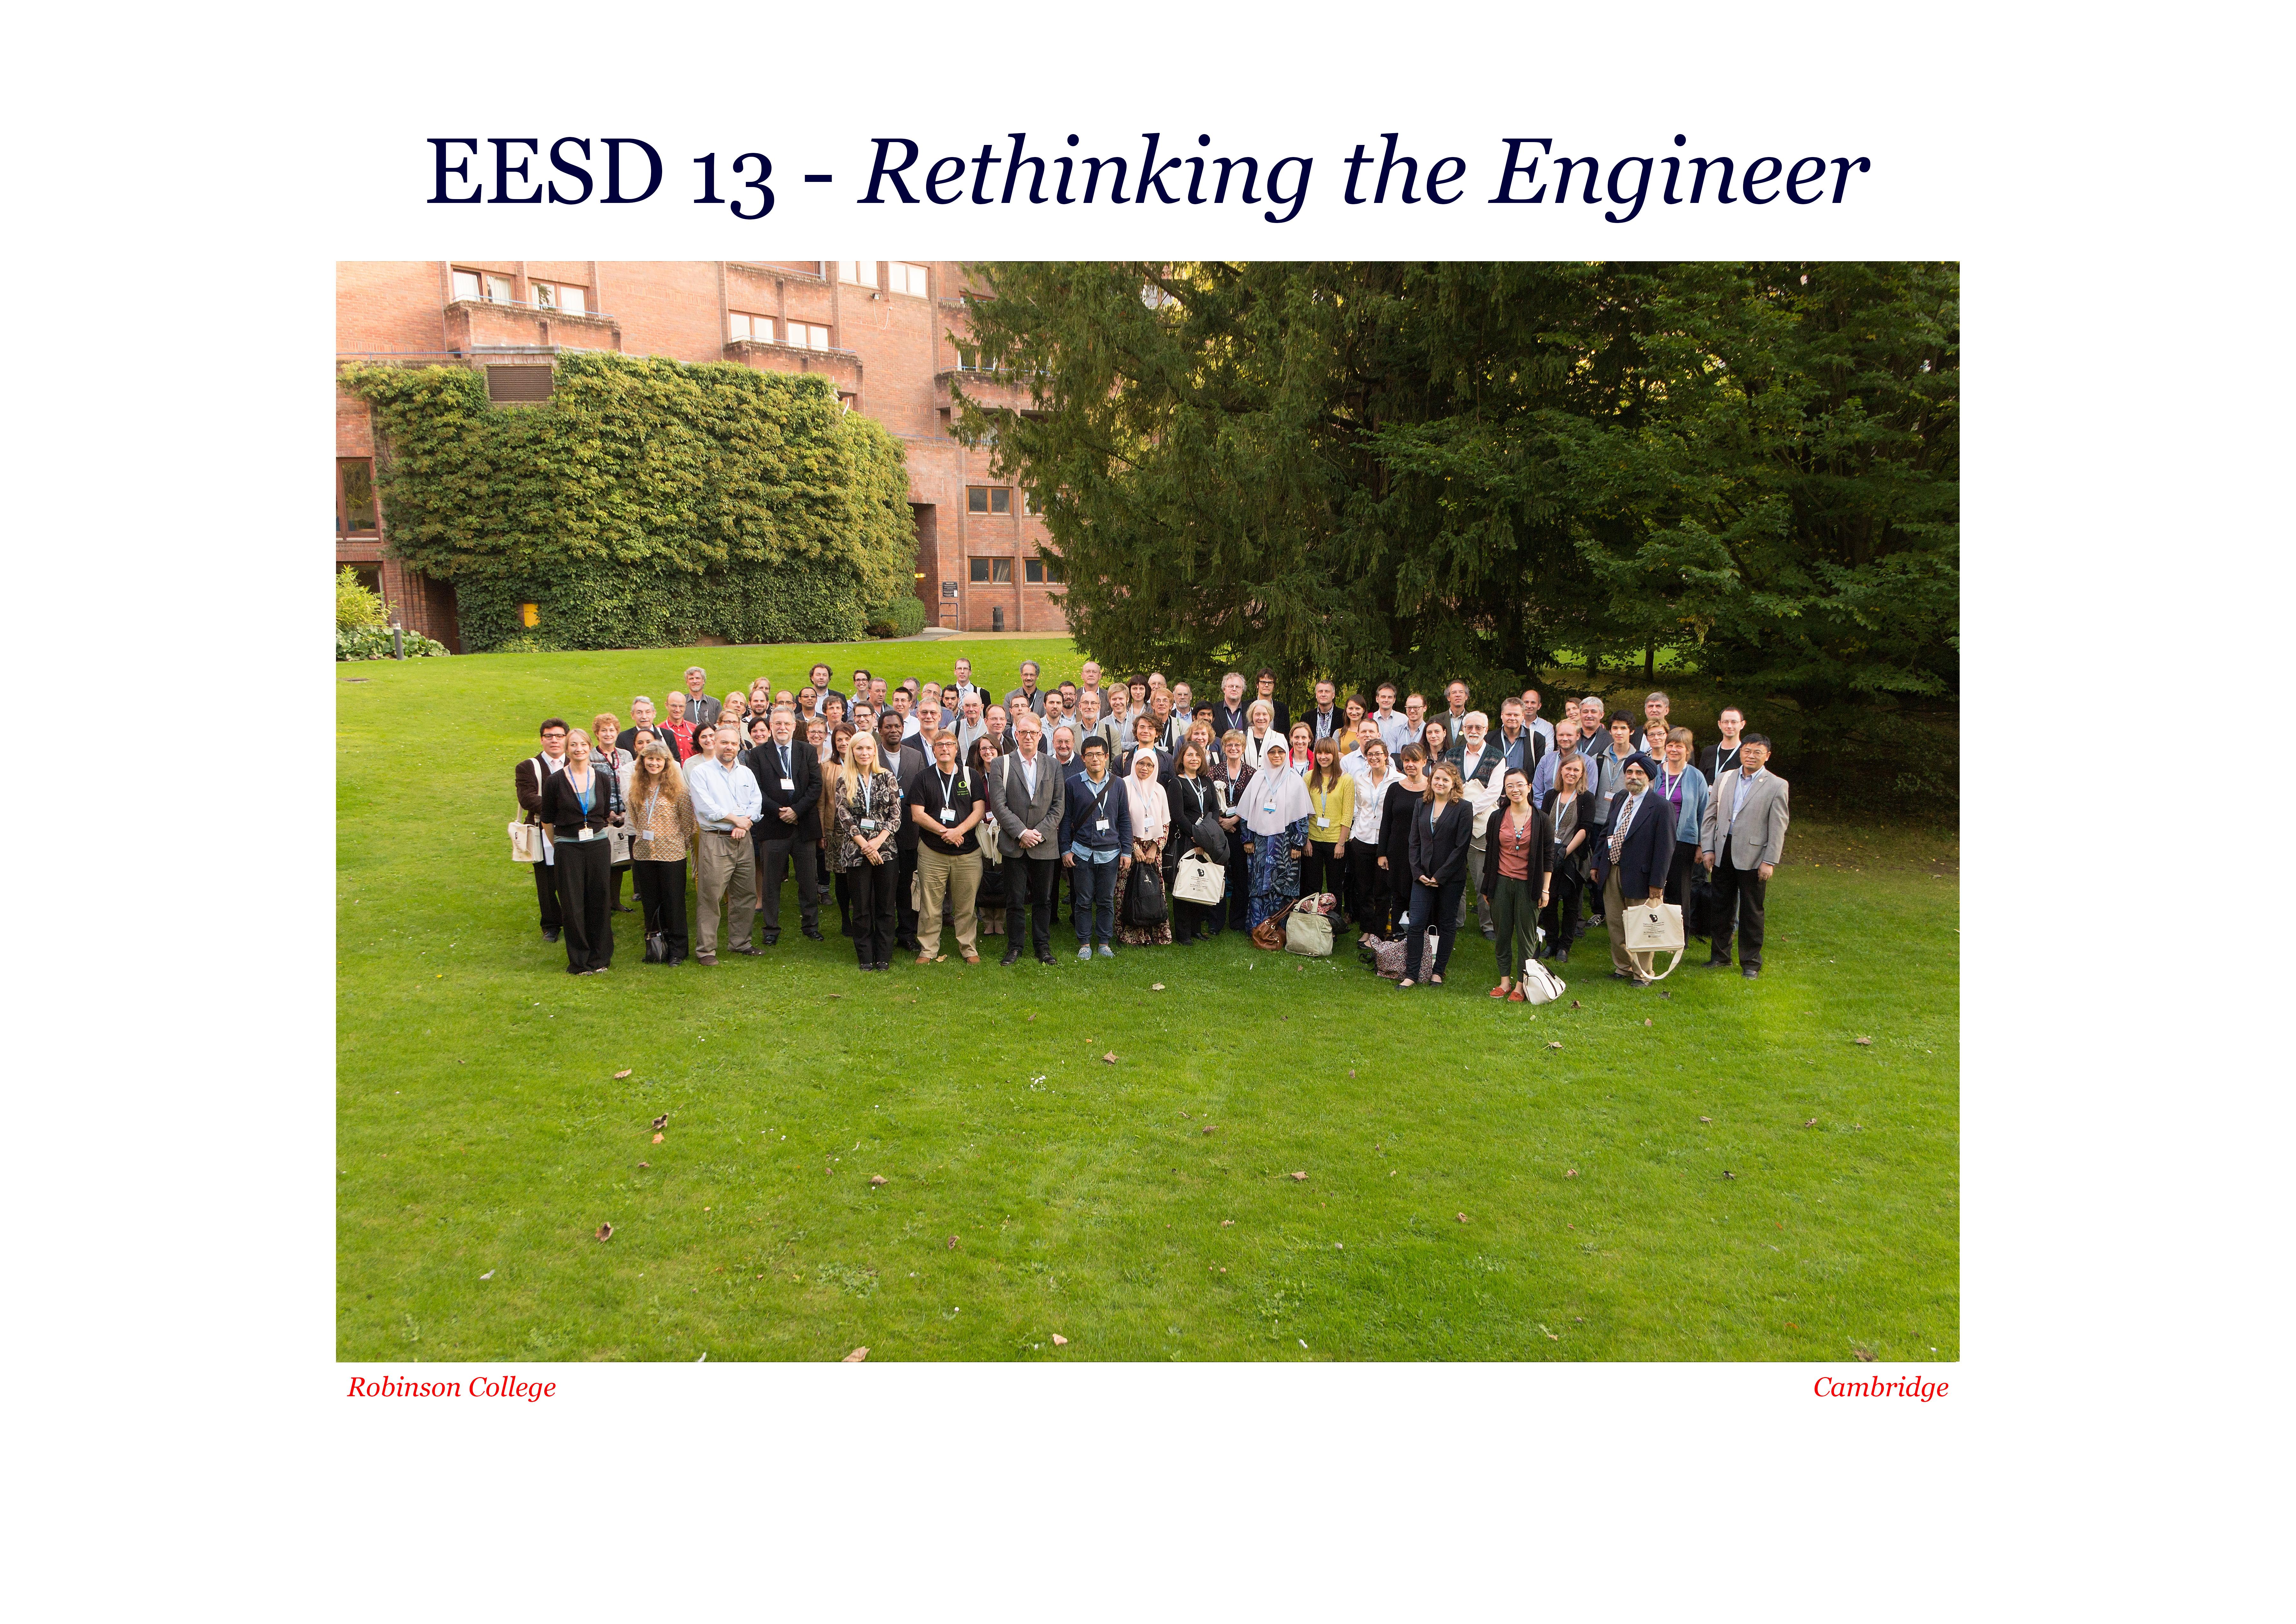 6th International Conference in Engineering Education for Sustainable Development (EESD13)